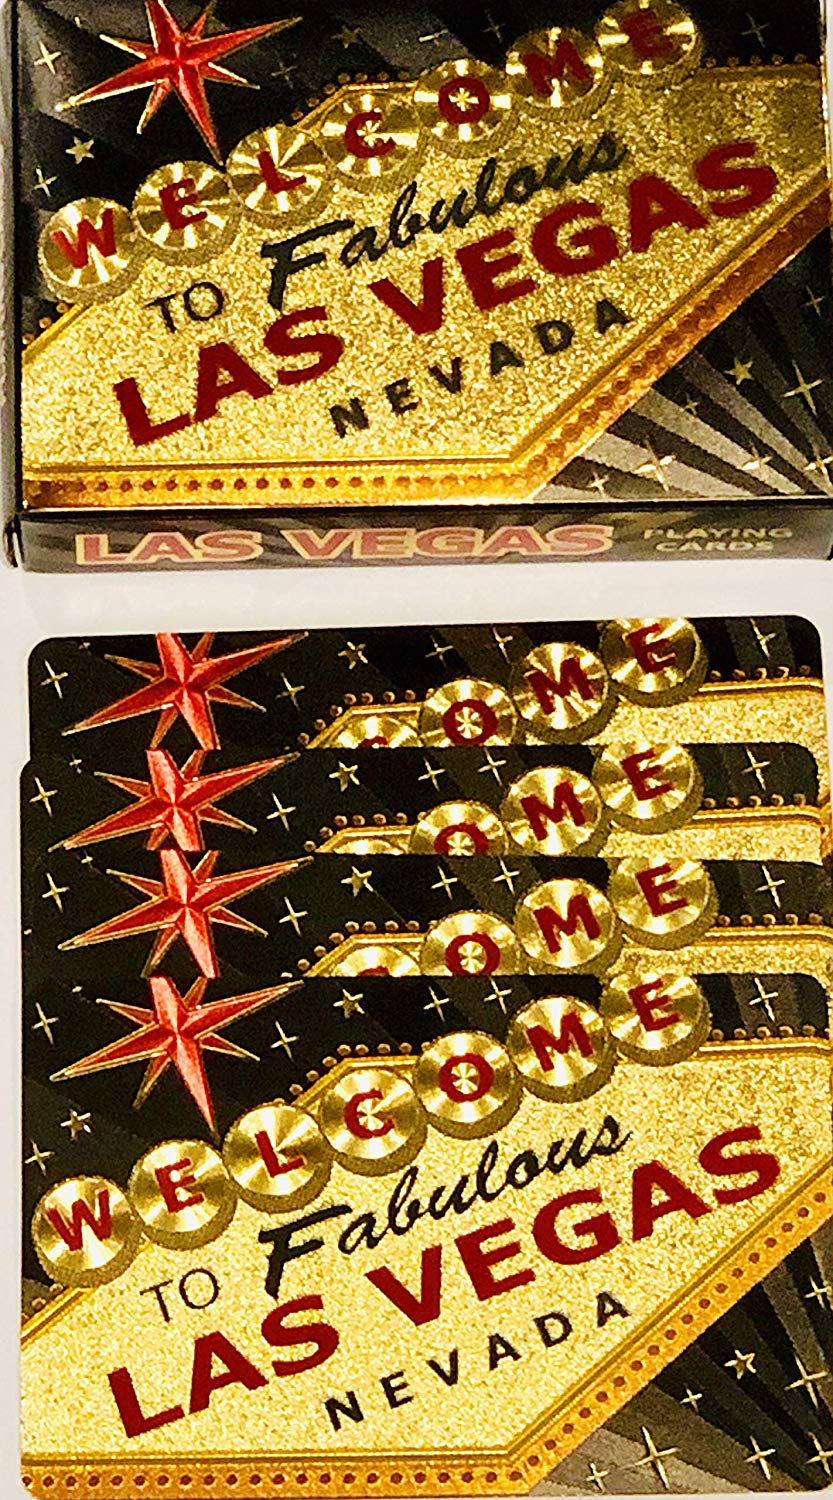 Welcome to Fabulous Las Vegas Black Foil Playing Cards, Pop Culture, Vegas Cards